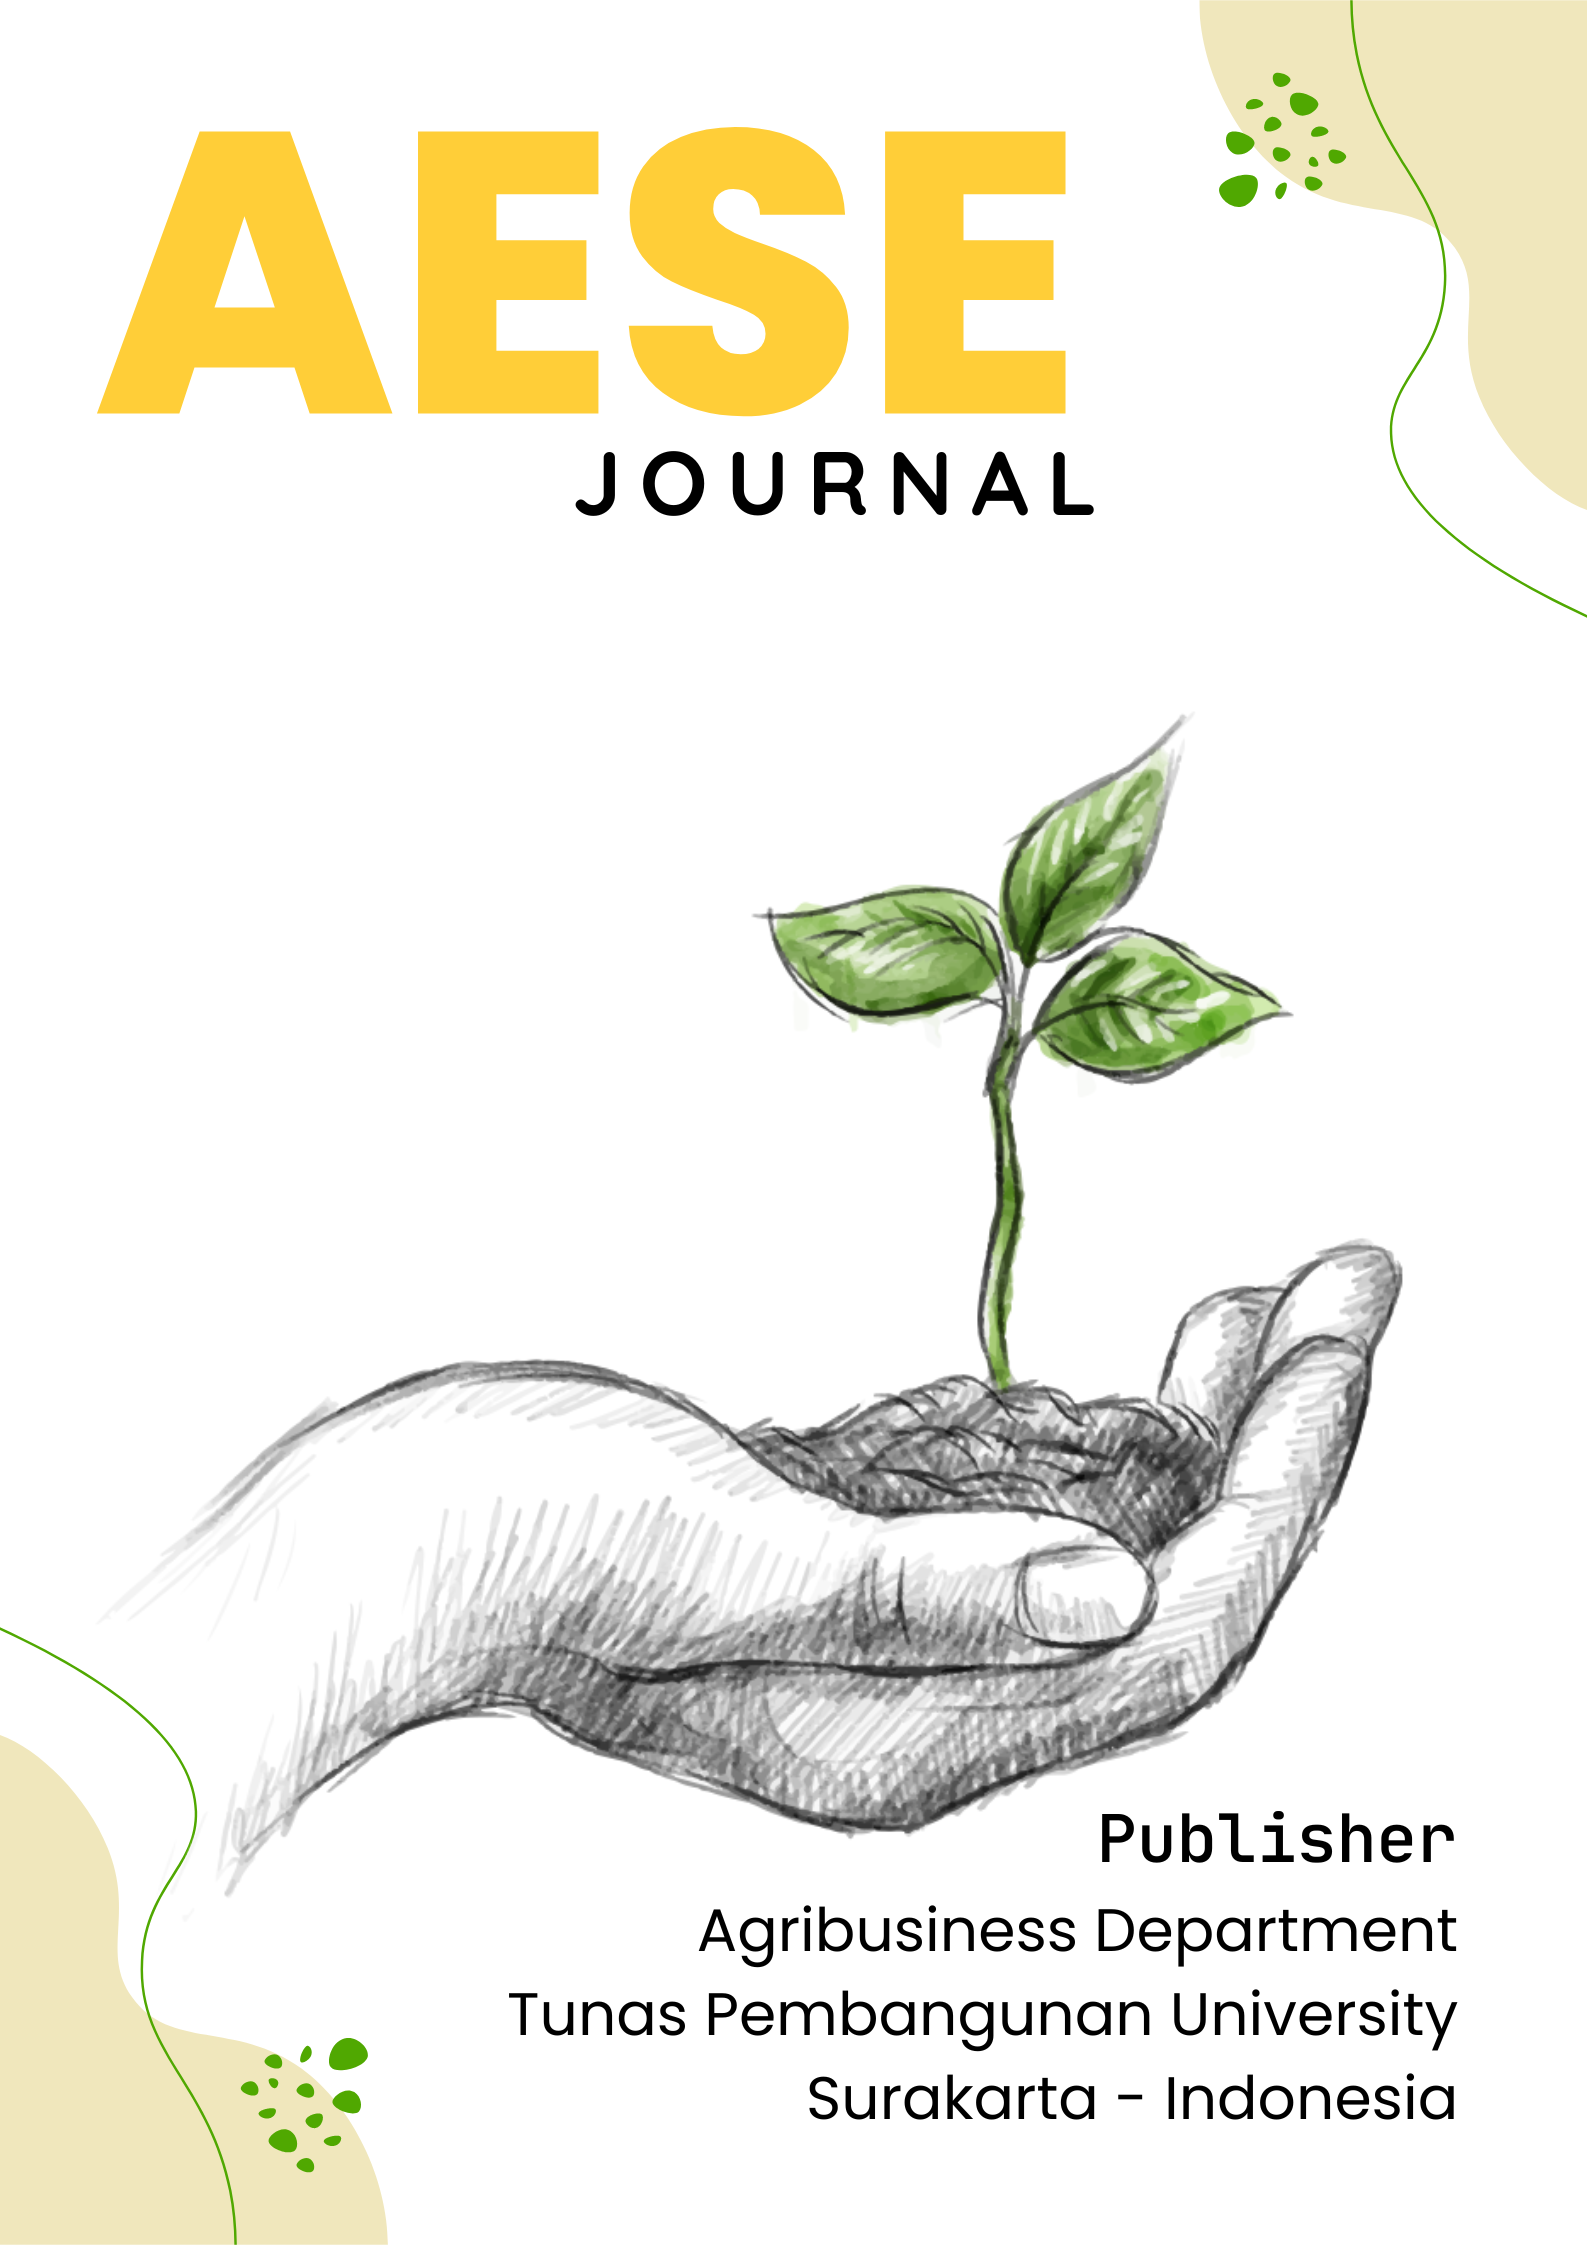 AESE Journal Cover